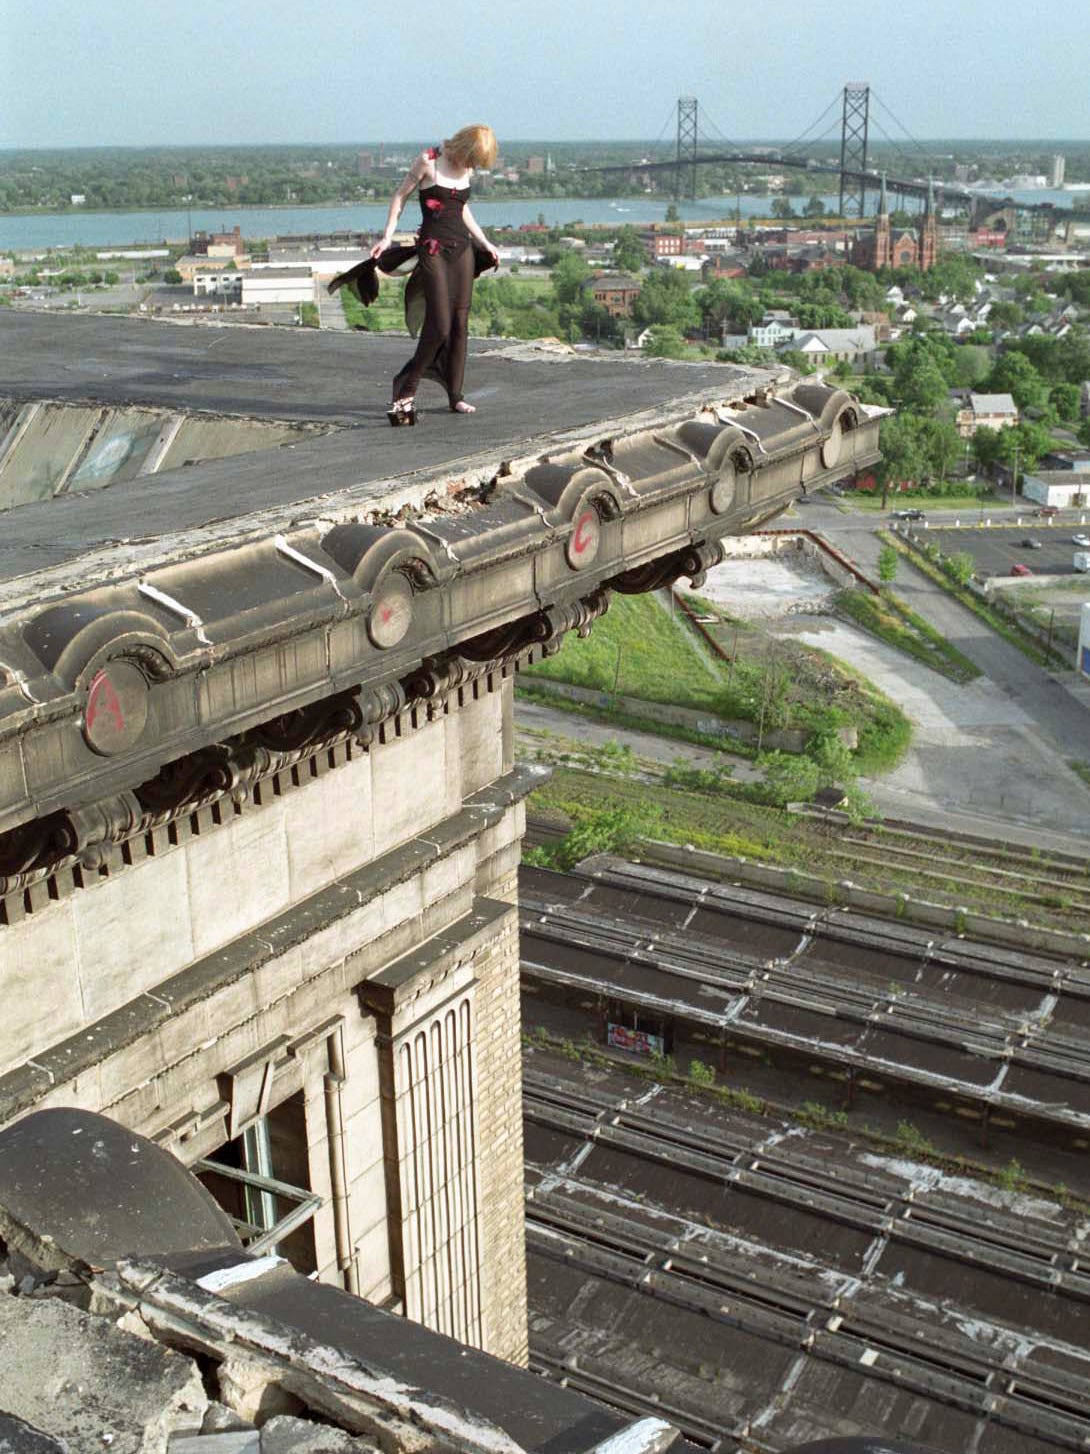 The abandoned train station became a popular location for fashion shoots, like this one on the roof in 1998.